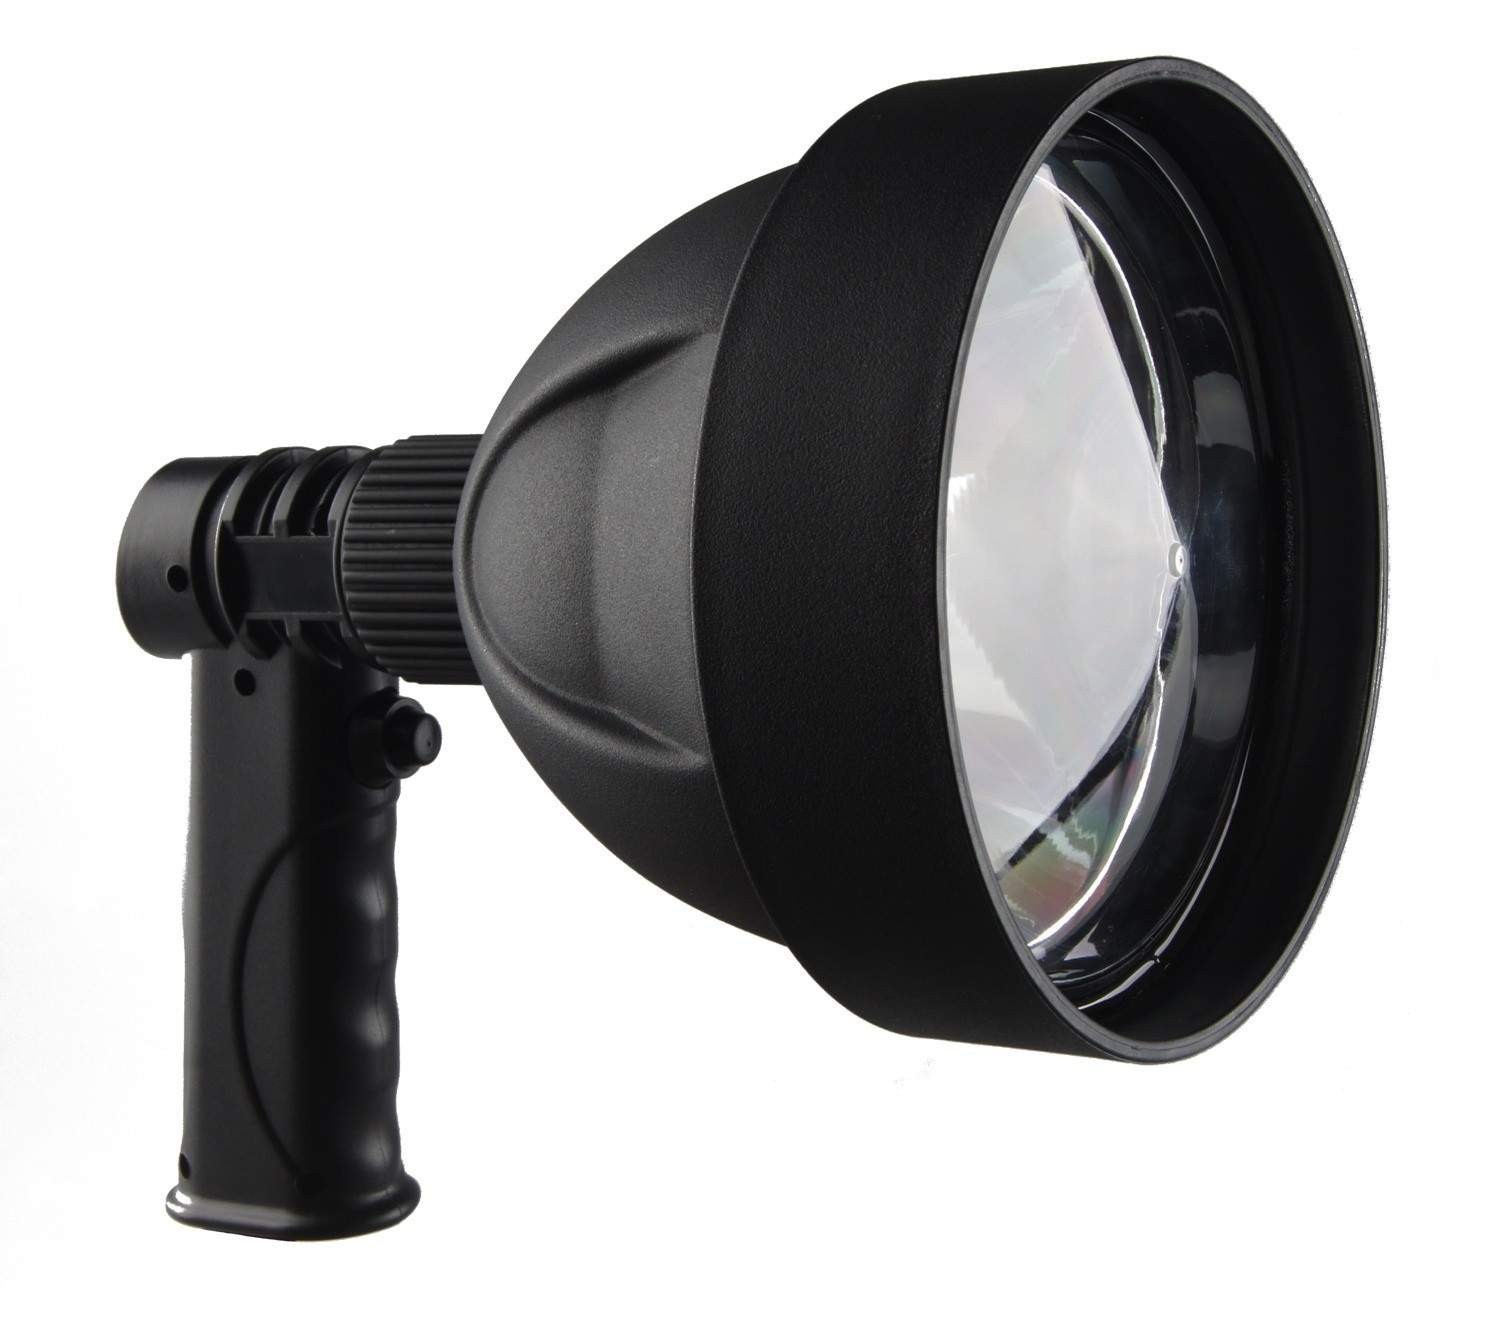 Lampe spot à LED 1300 Lumens - Lampes - Projecteurs | Made in Chasse